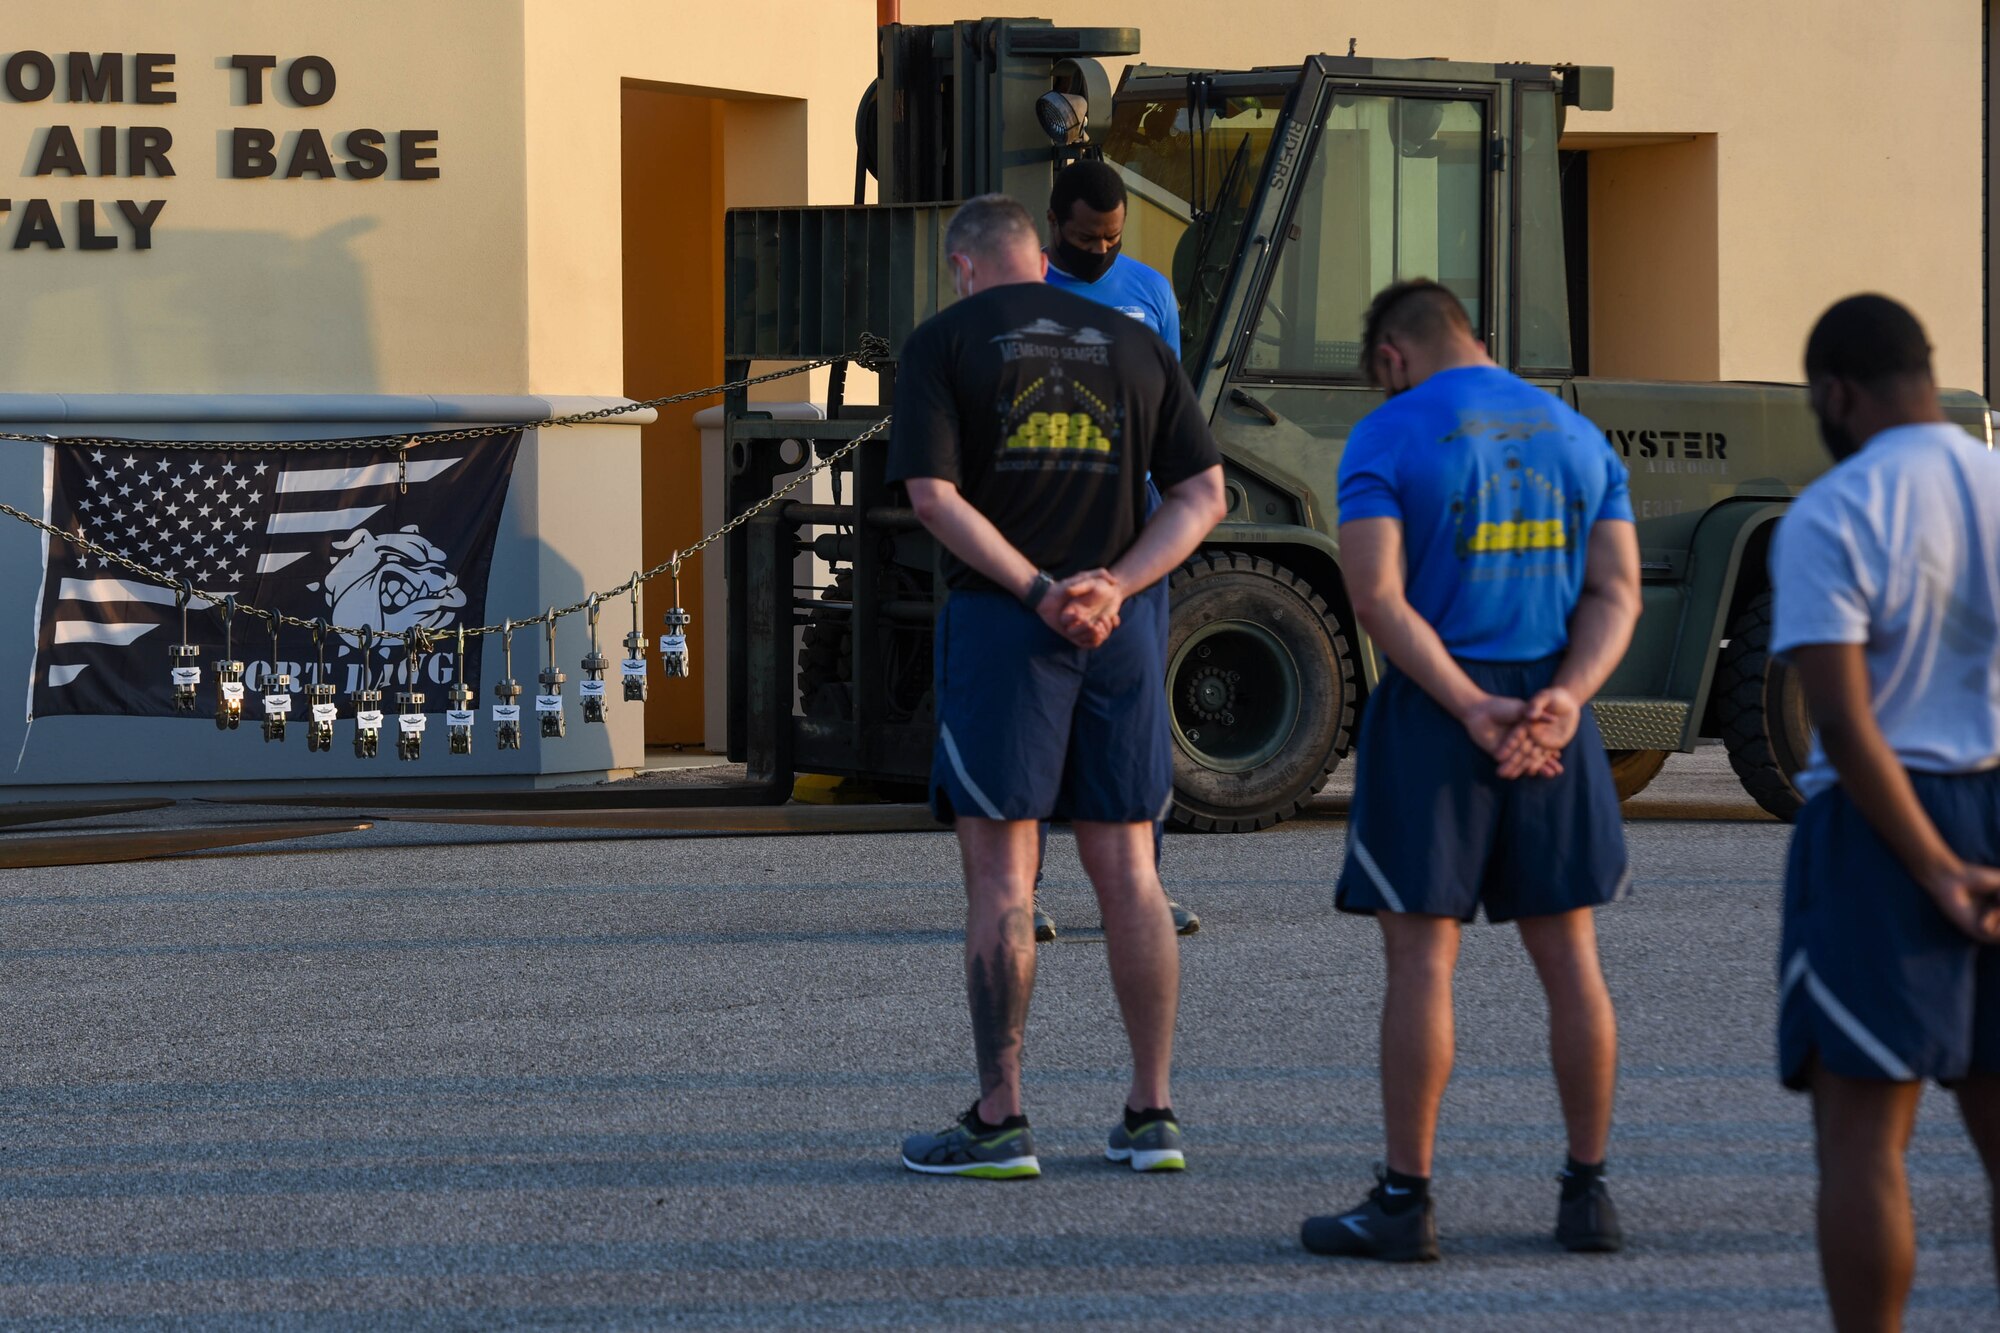 Members of the 724th Aircraft Maintenance Squadron observe a moment of silence before a ‘Port Dawg’ memorial run at Aviano Air Base, Italy, May 27, 2021. The run is held annually throughout the career field as a way to honor members who have fallen while serving as a ‘Port Dawg.’ The event is an opportunity to highlight the importance of the Port Dawgs in the AMS installations and community. (U.S. Air Force photo by Airman 1st Class Brooke Moeder)